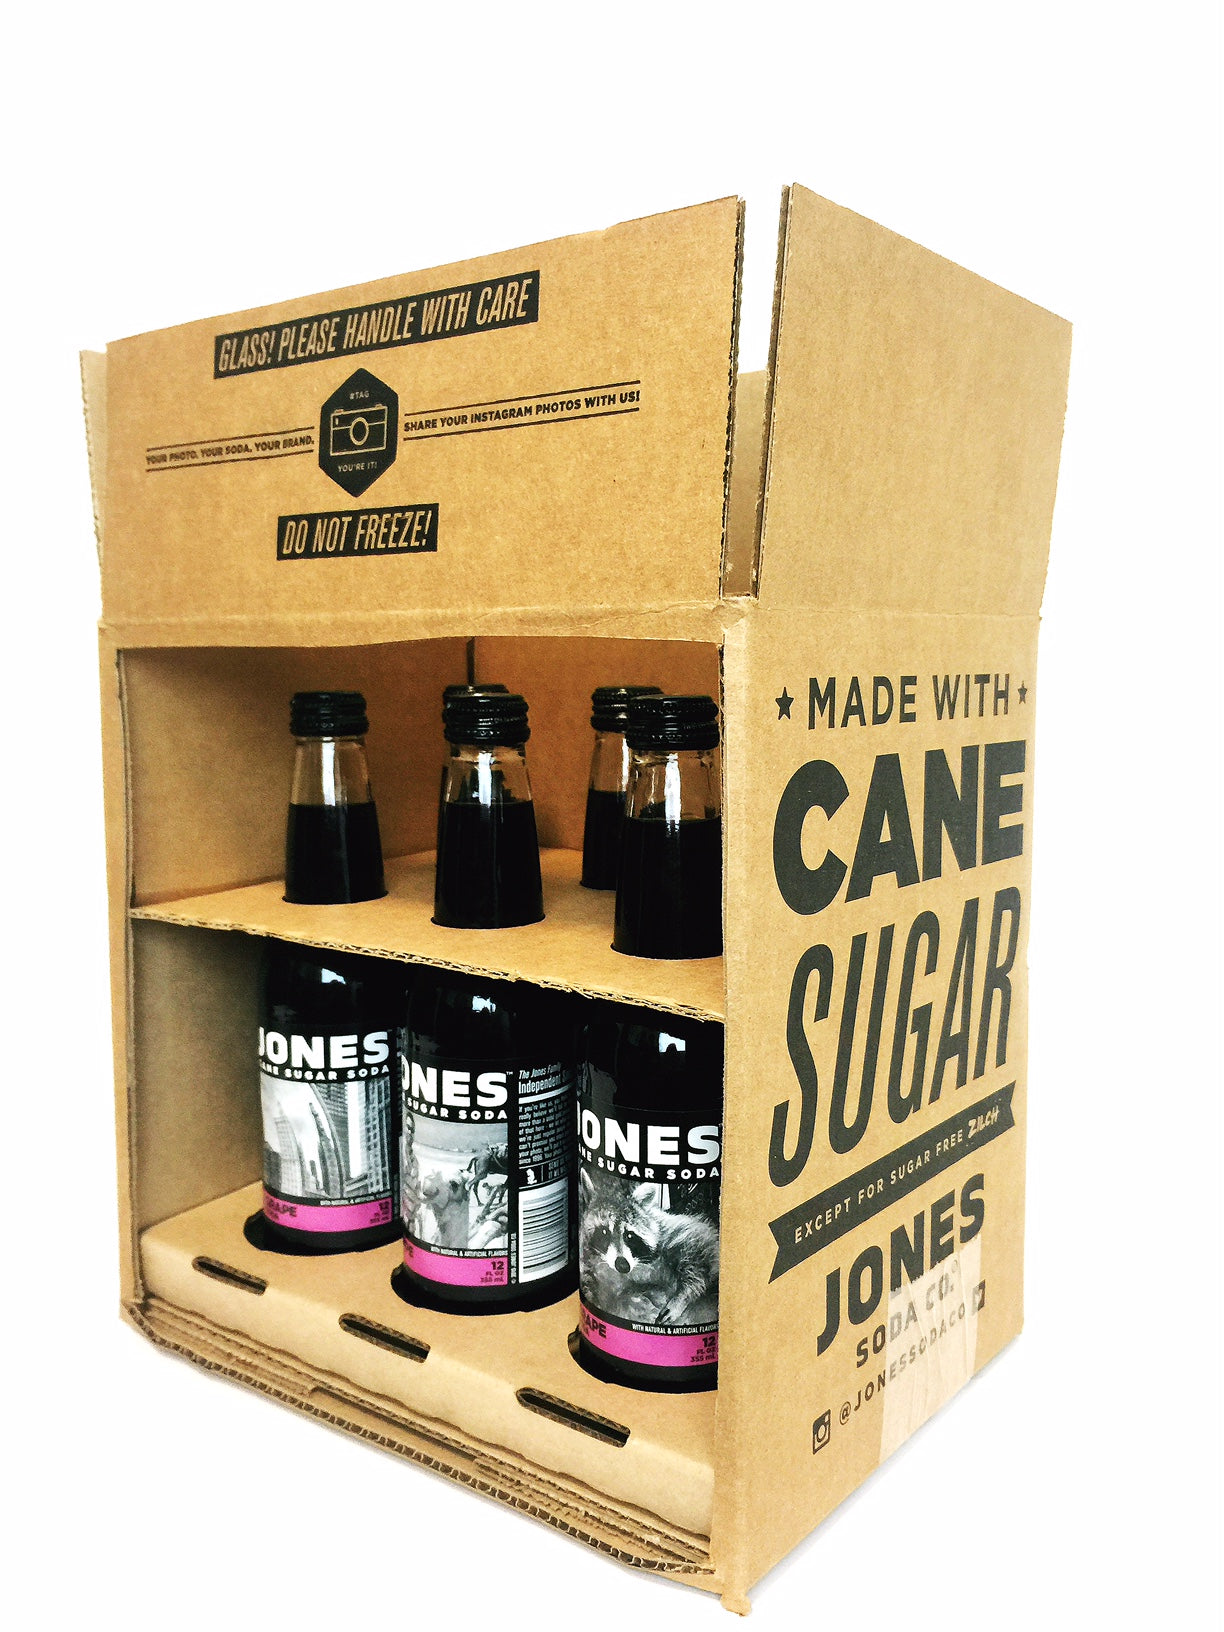 How Jones Soda Saved Itself From A Decade Of Unprofitability And $58 Million In Losses